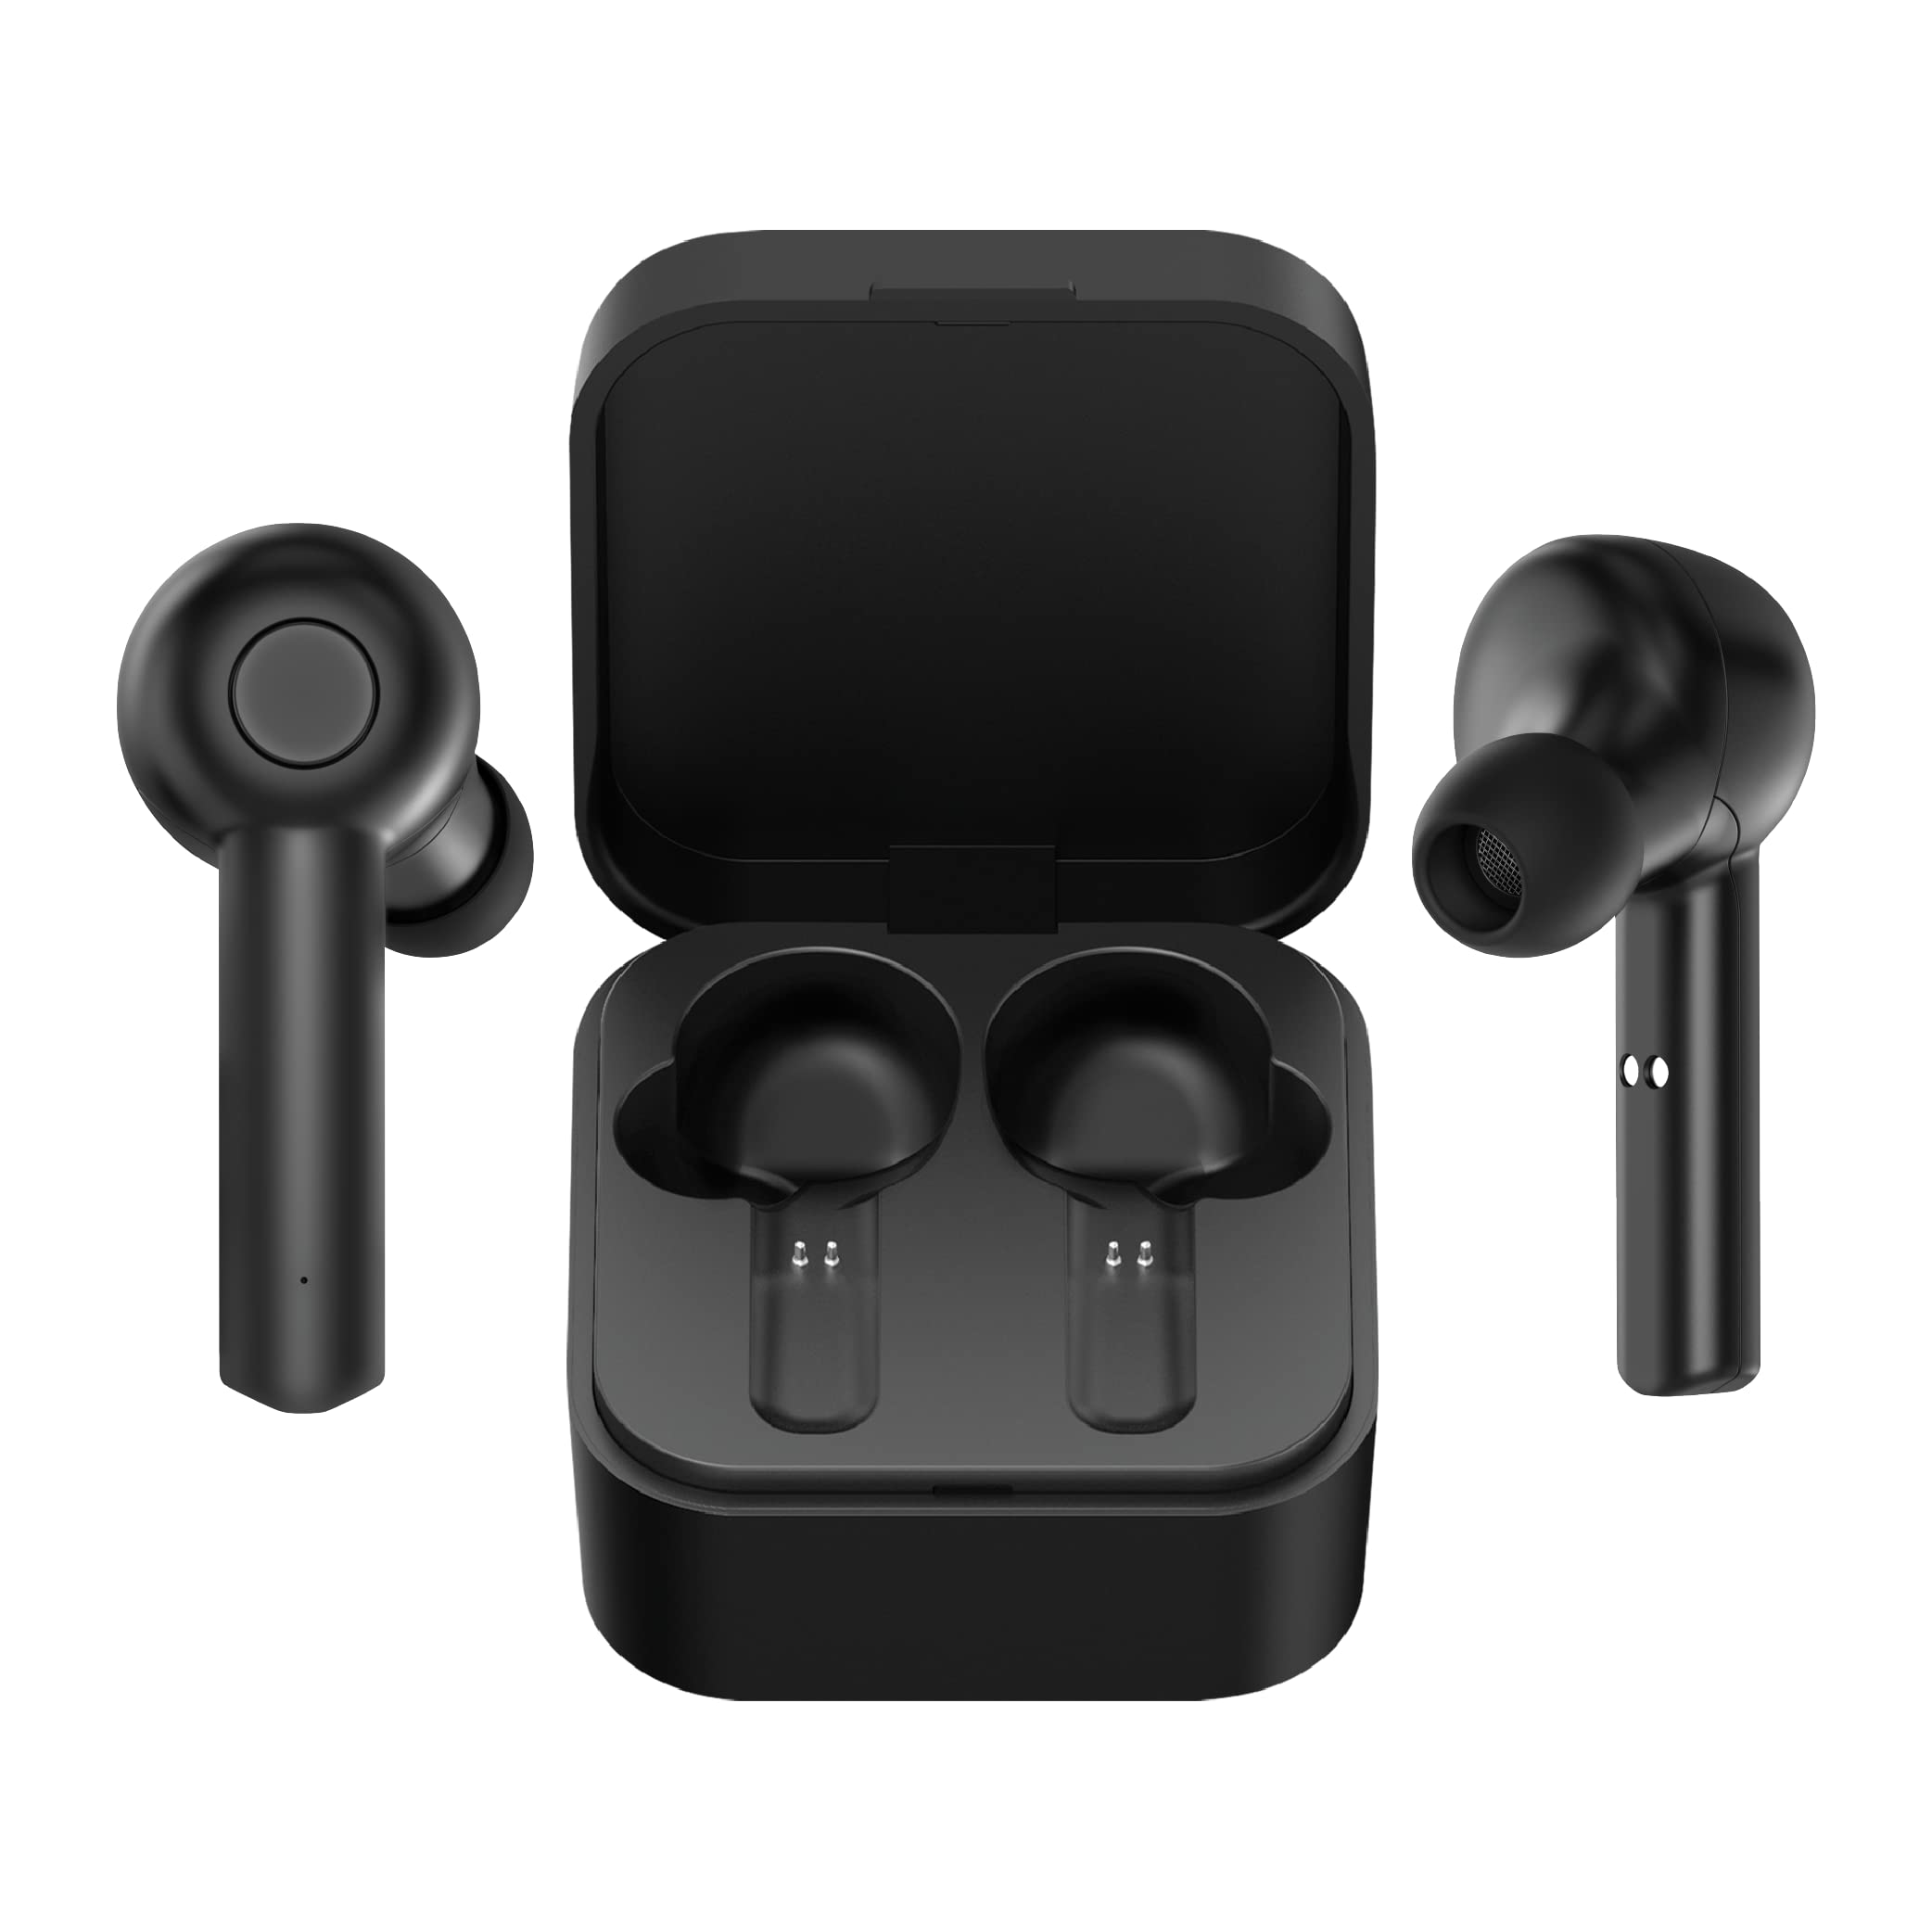 connecting-coby-wireless-earbuds-a-quick-tutorial